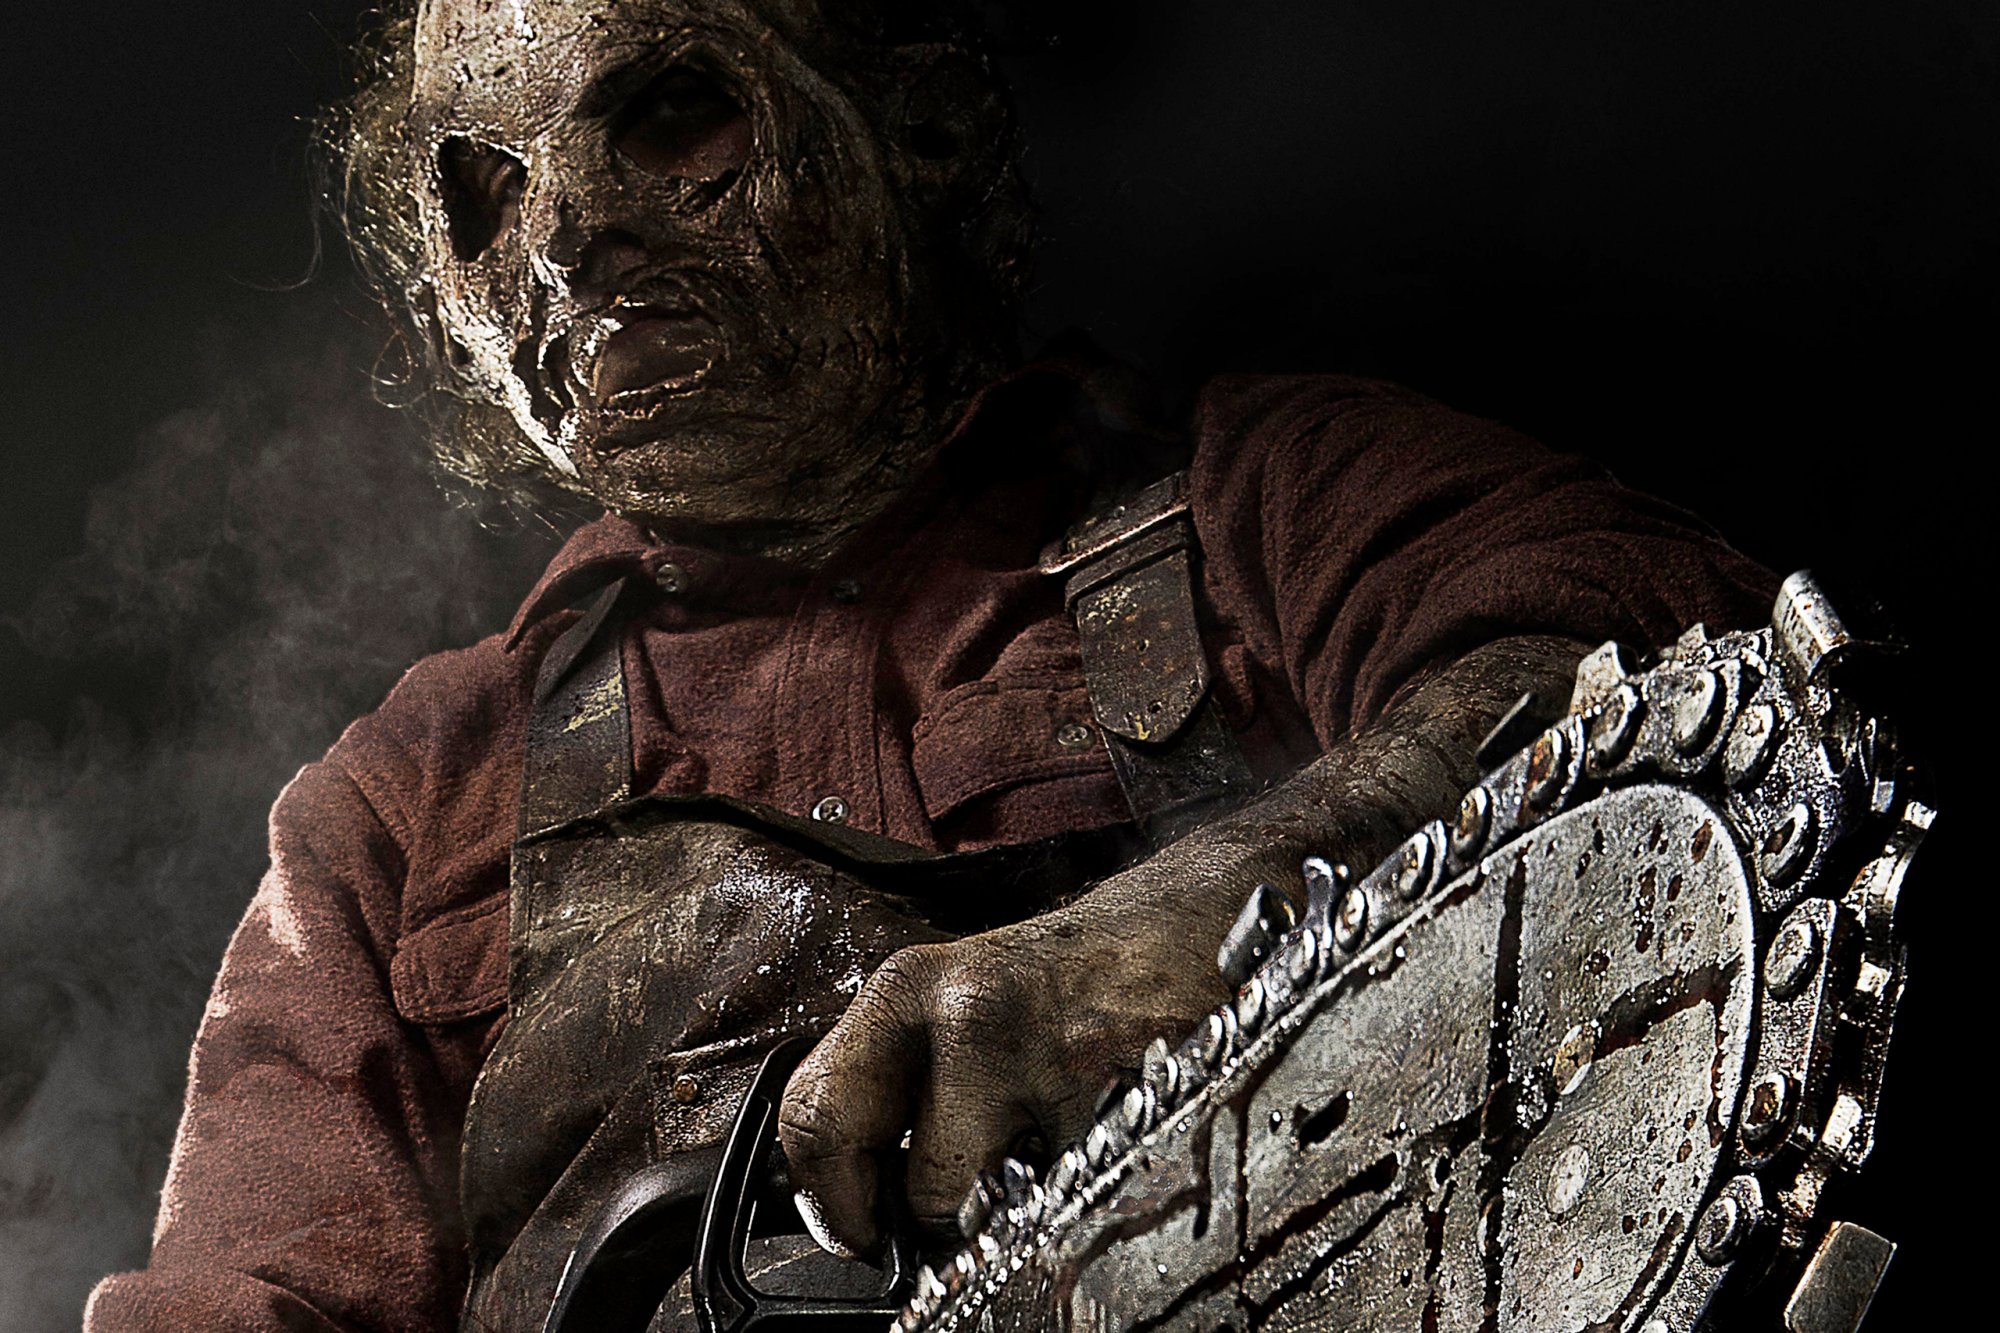 texas, Chainsaw, Dark, Horror Wallpapers HD / Desktop and Mobile Background...